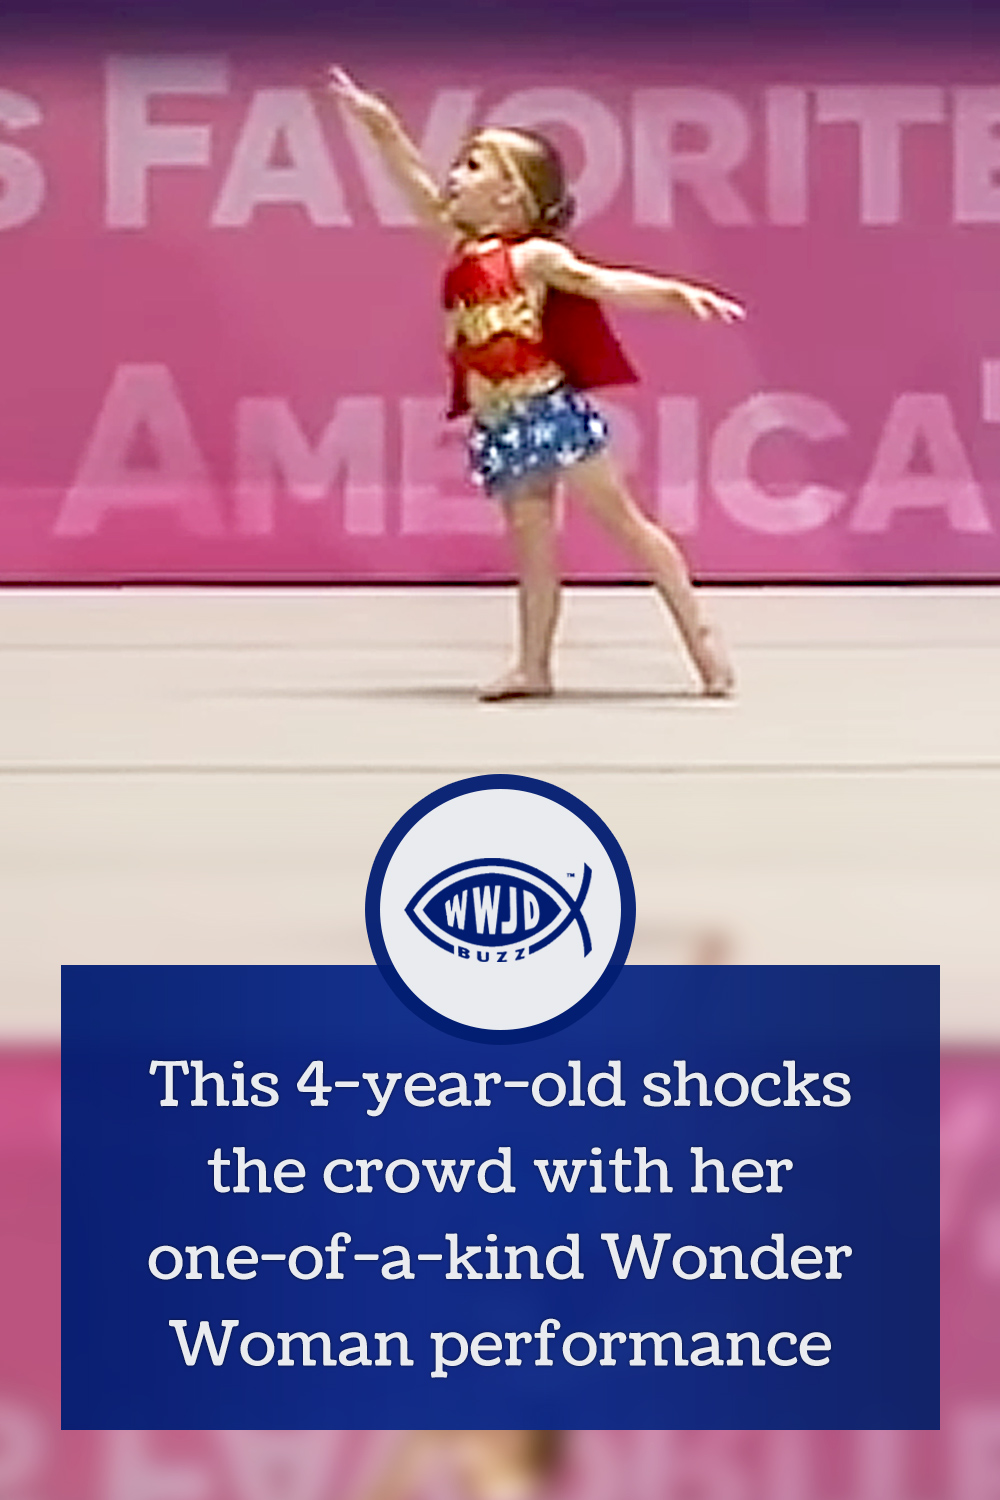 This 4-year-old shocks the crowd with her one-of-a-kind Wonder Woman performance